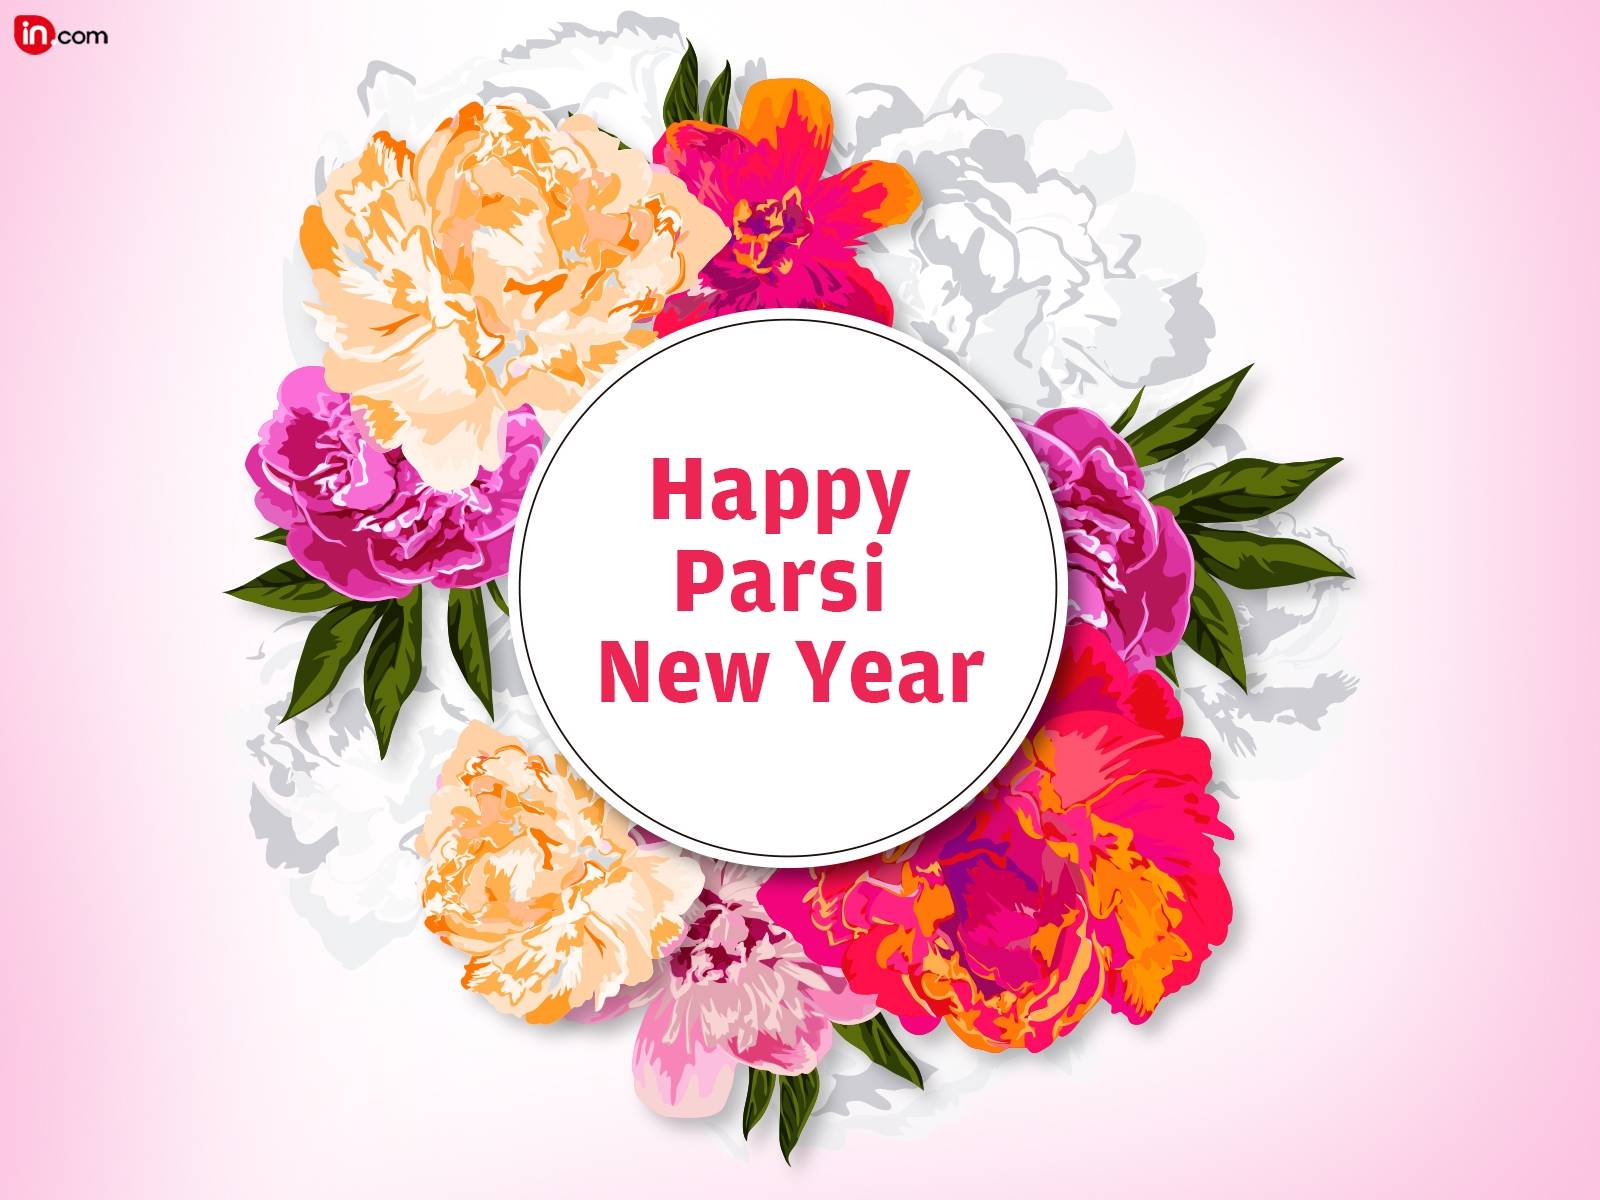 Happy Parsi New Year Flower Greeting Card